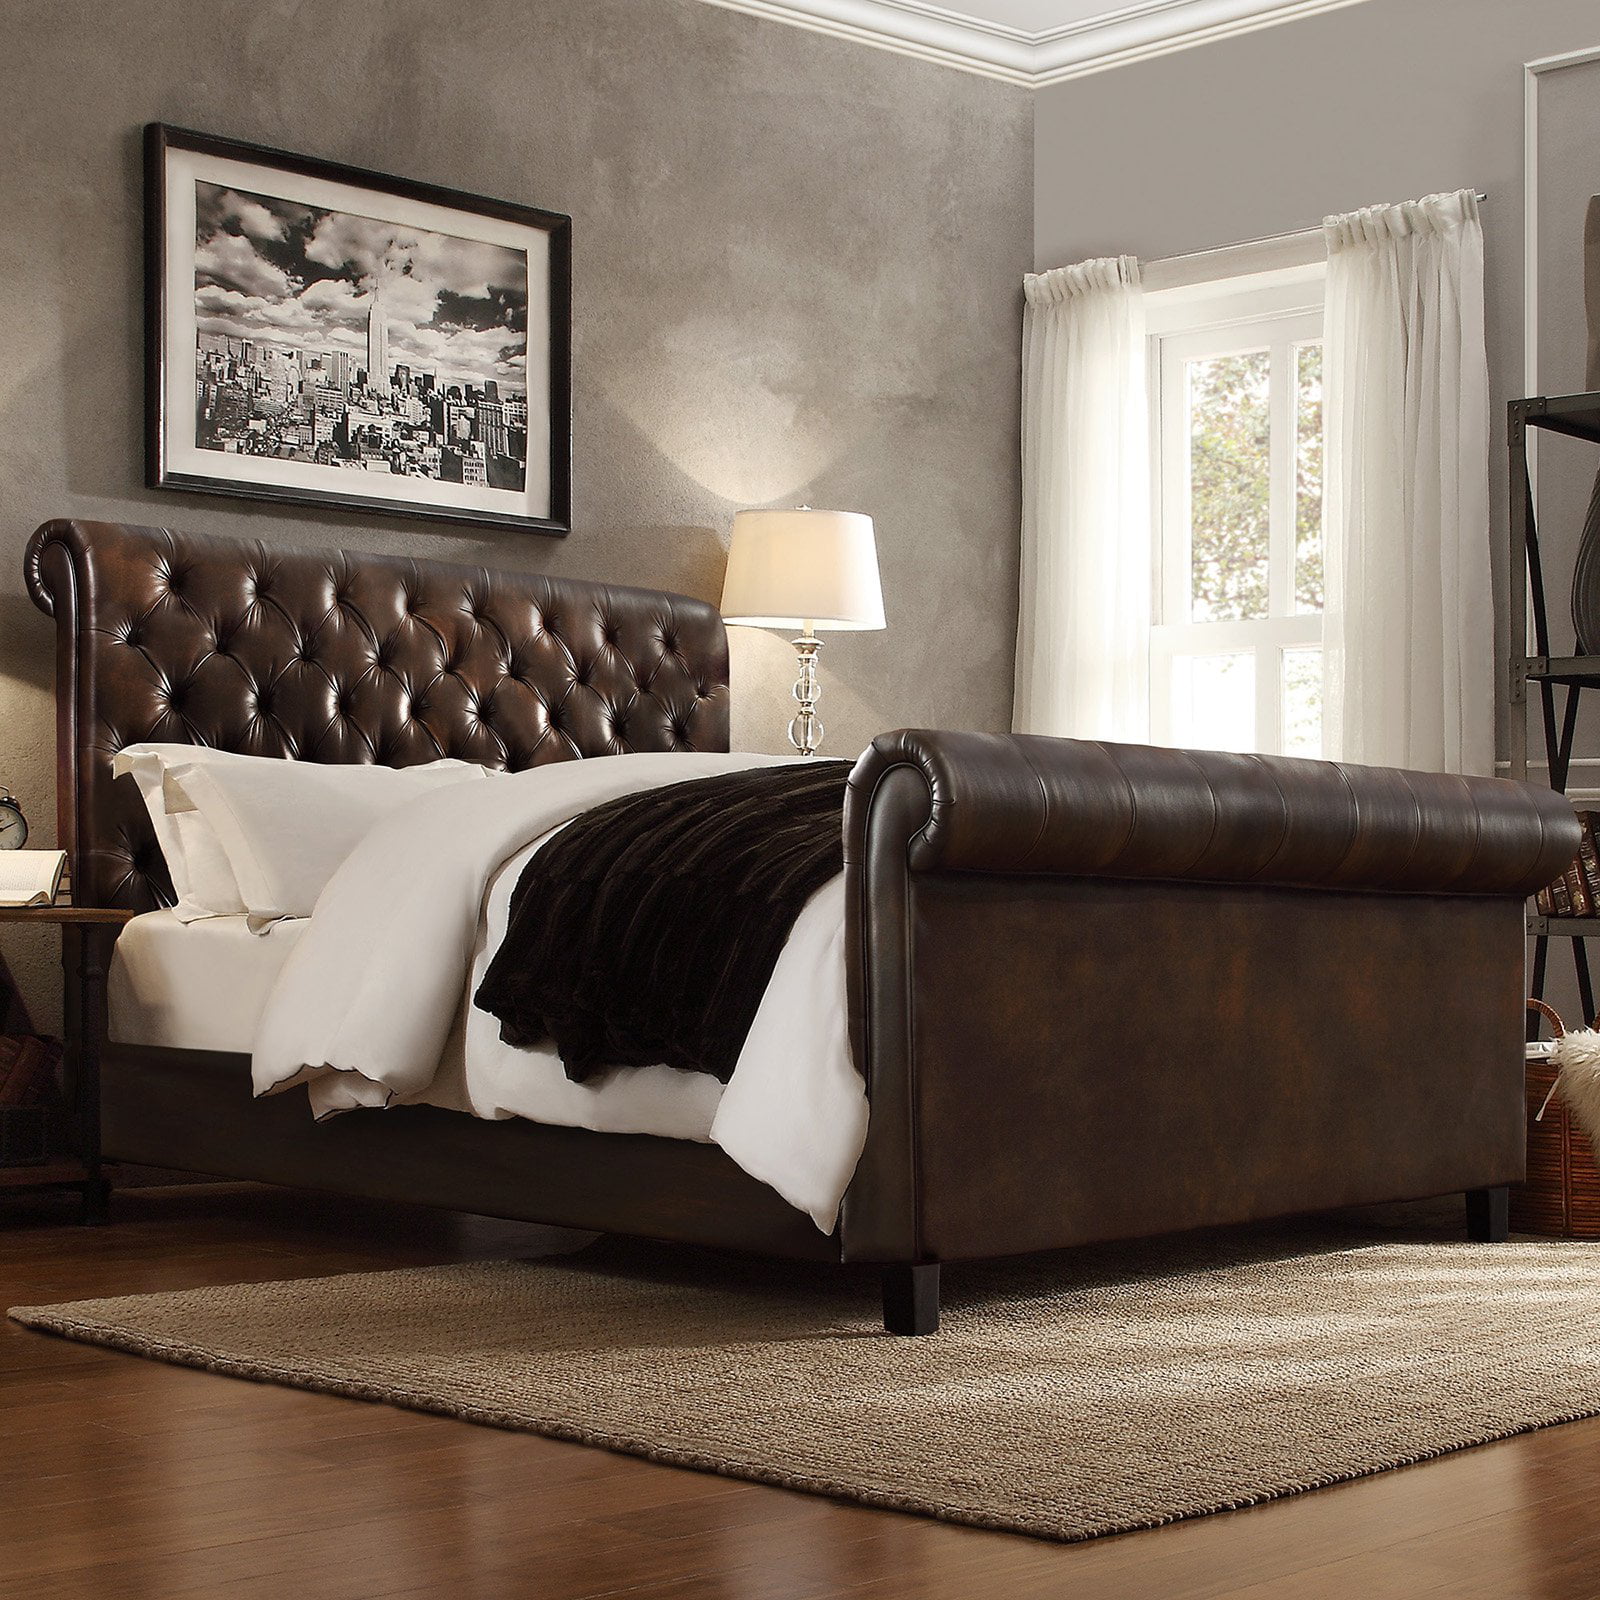 Weston Home Dartford Upholstered Faux, Leather Sleigh Bed